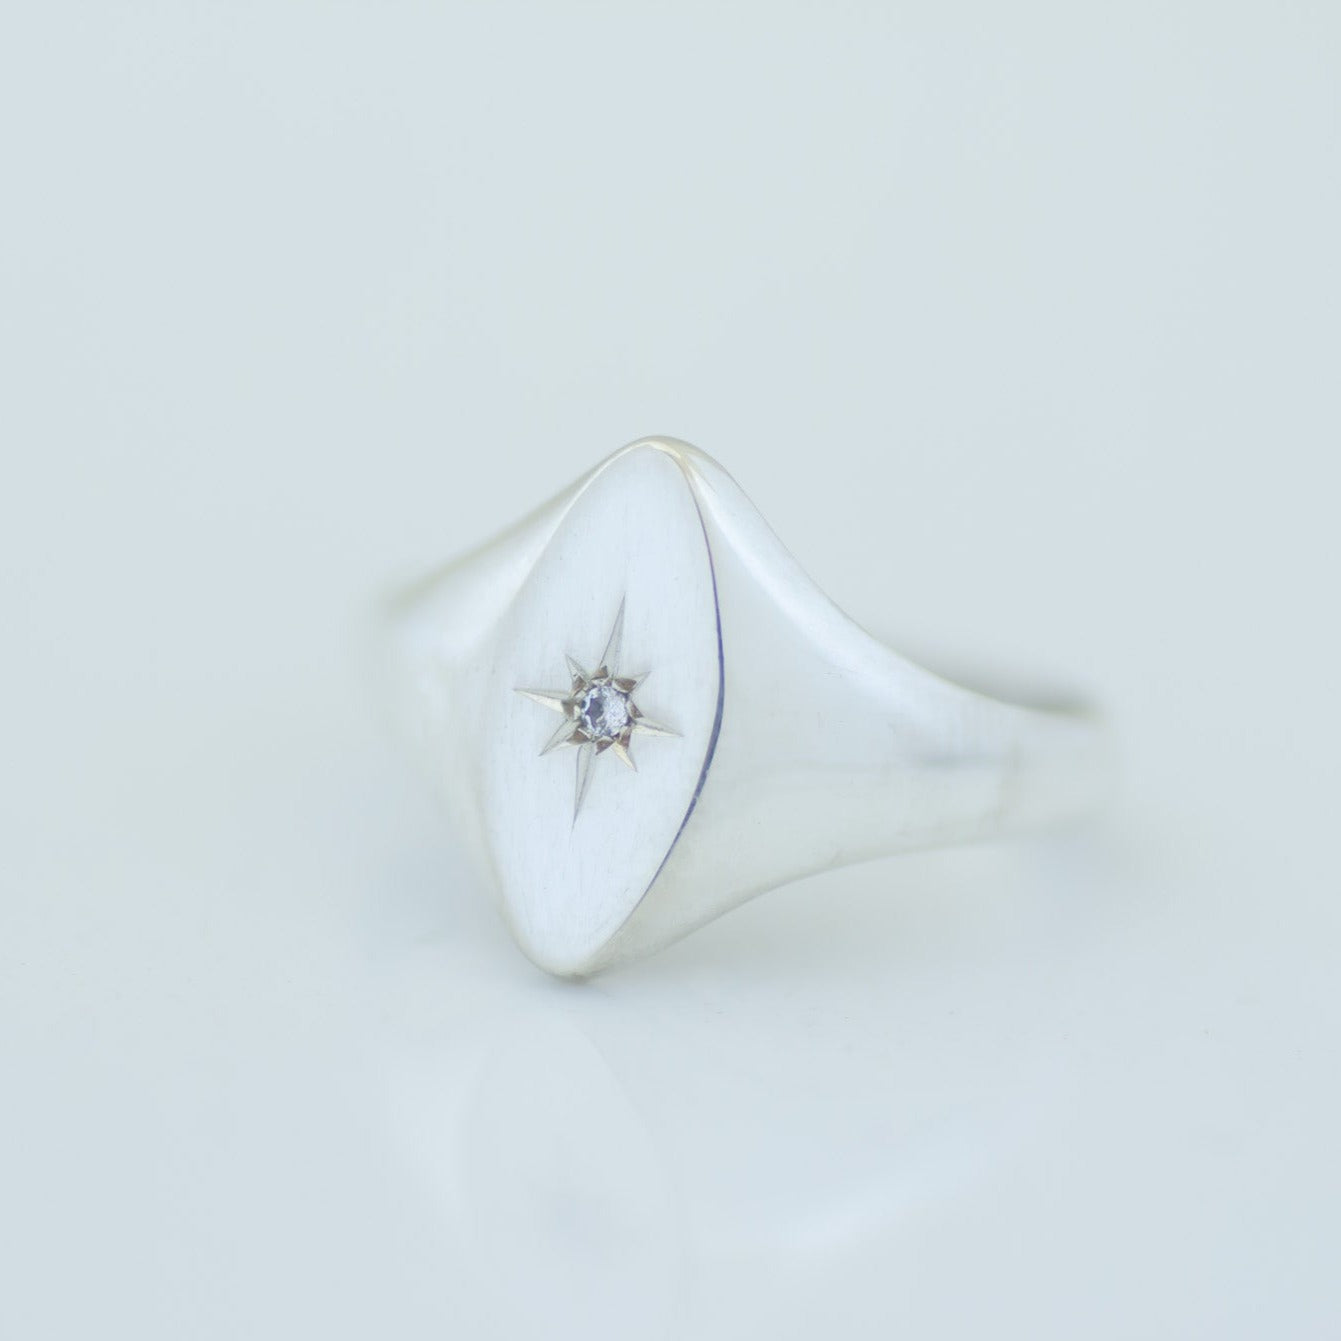 Marquise Star Signet Ring silver